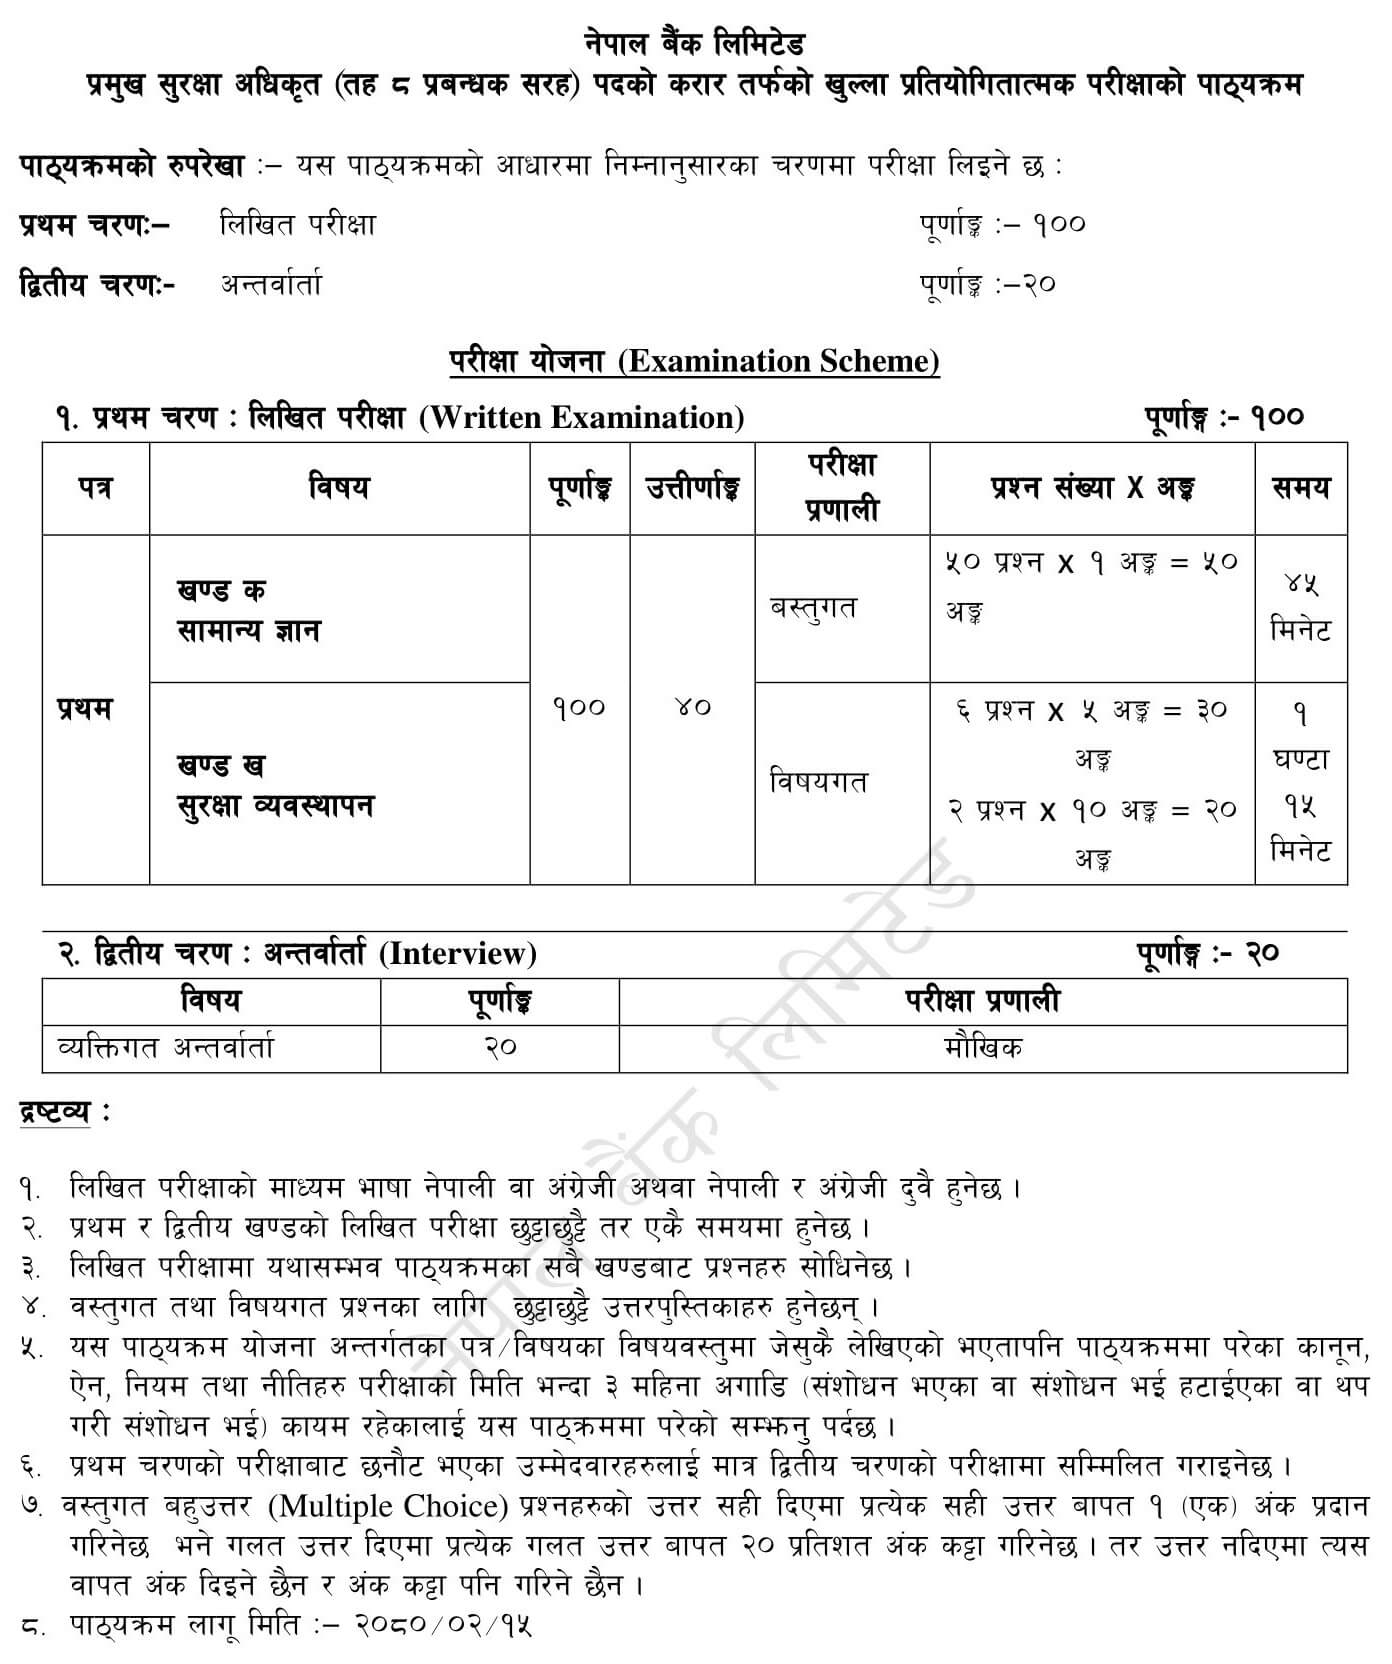 Nepal Bank Limited Syllabus Department: Administration Rank: Level 8 Chief Security Officer. NBL Chief Security Office Syllabus PDF Download